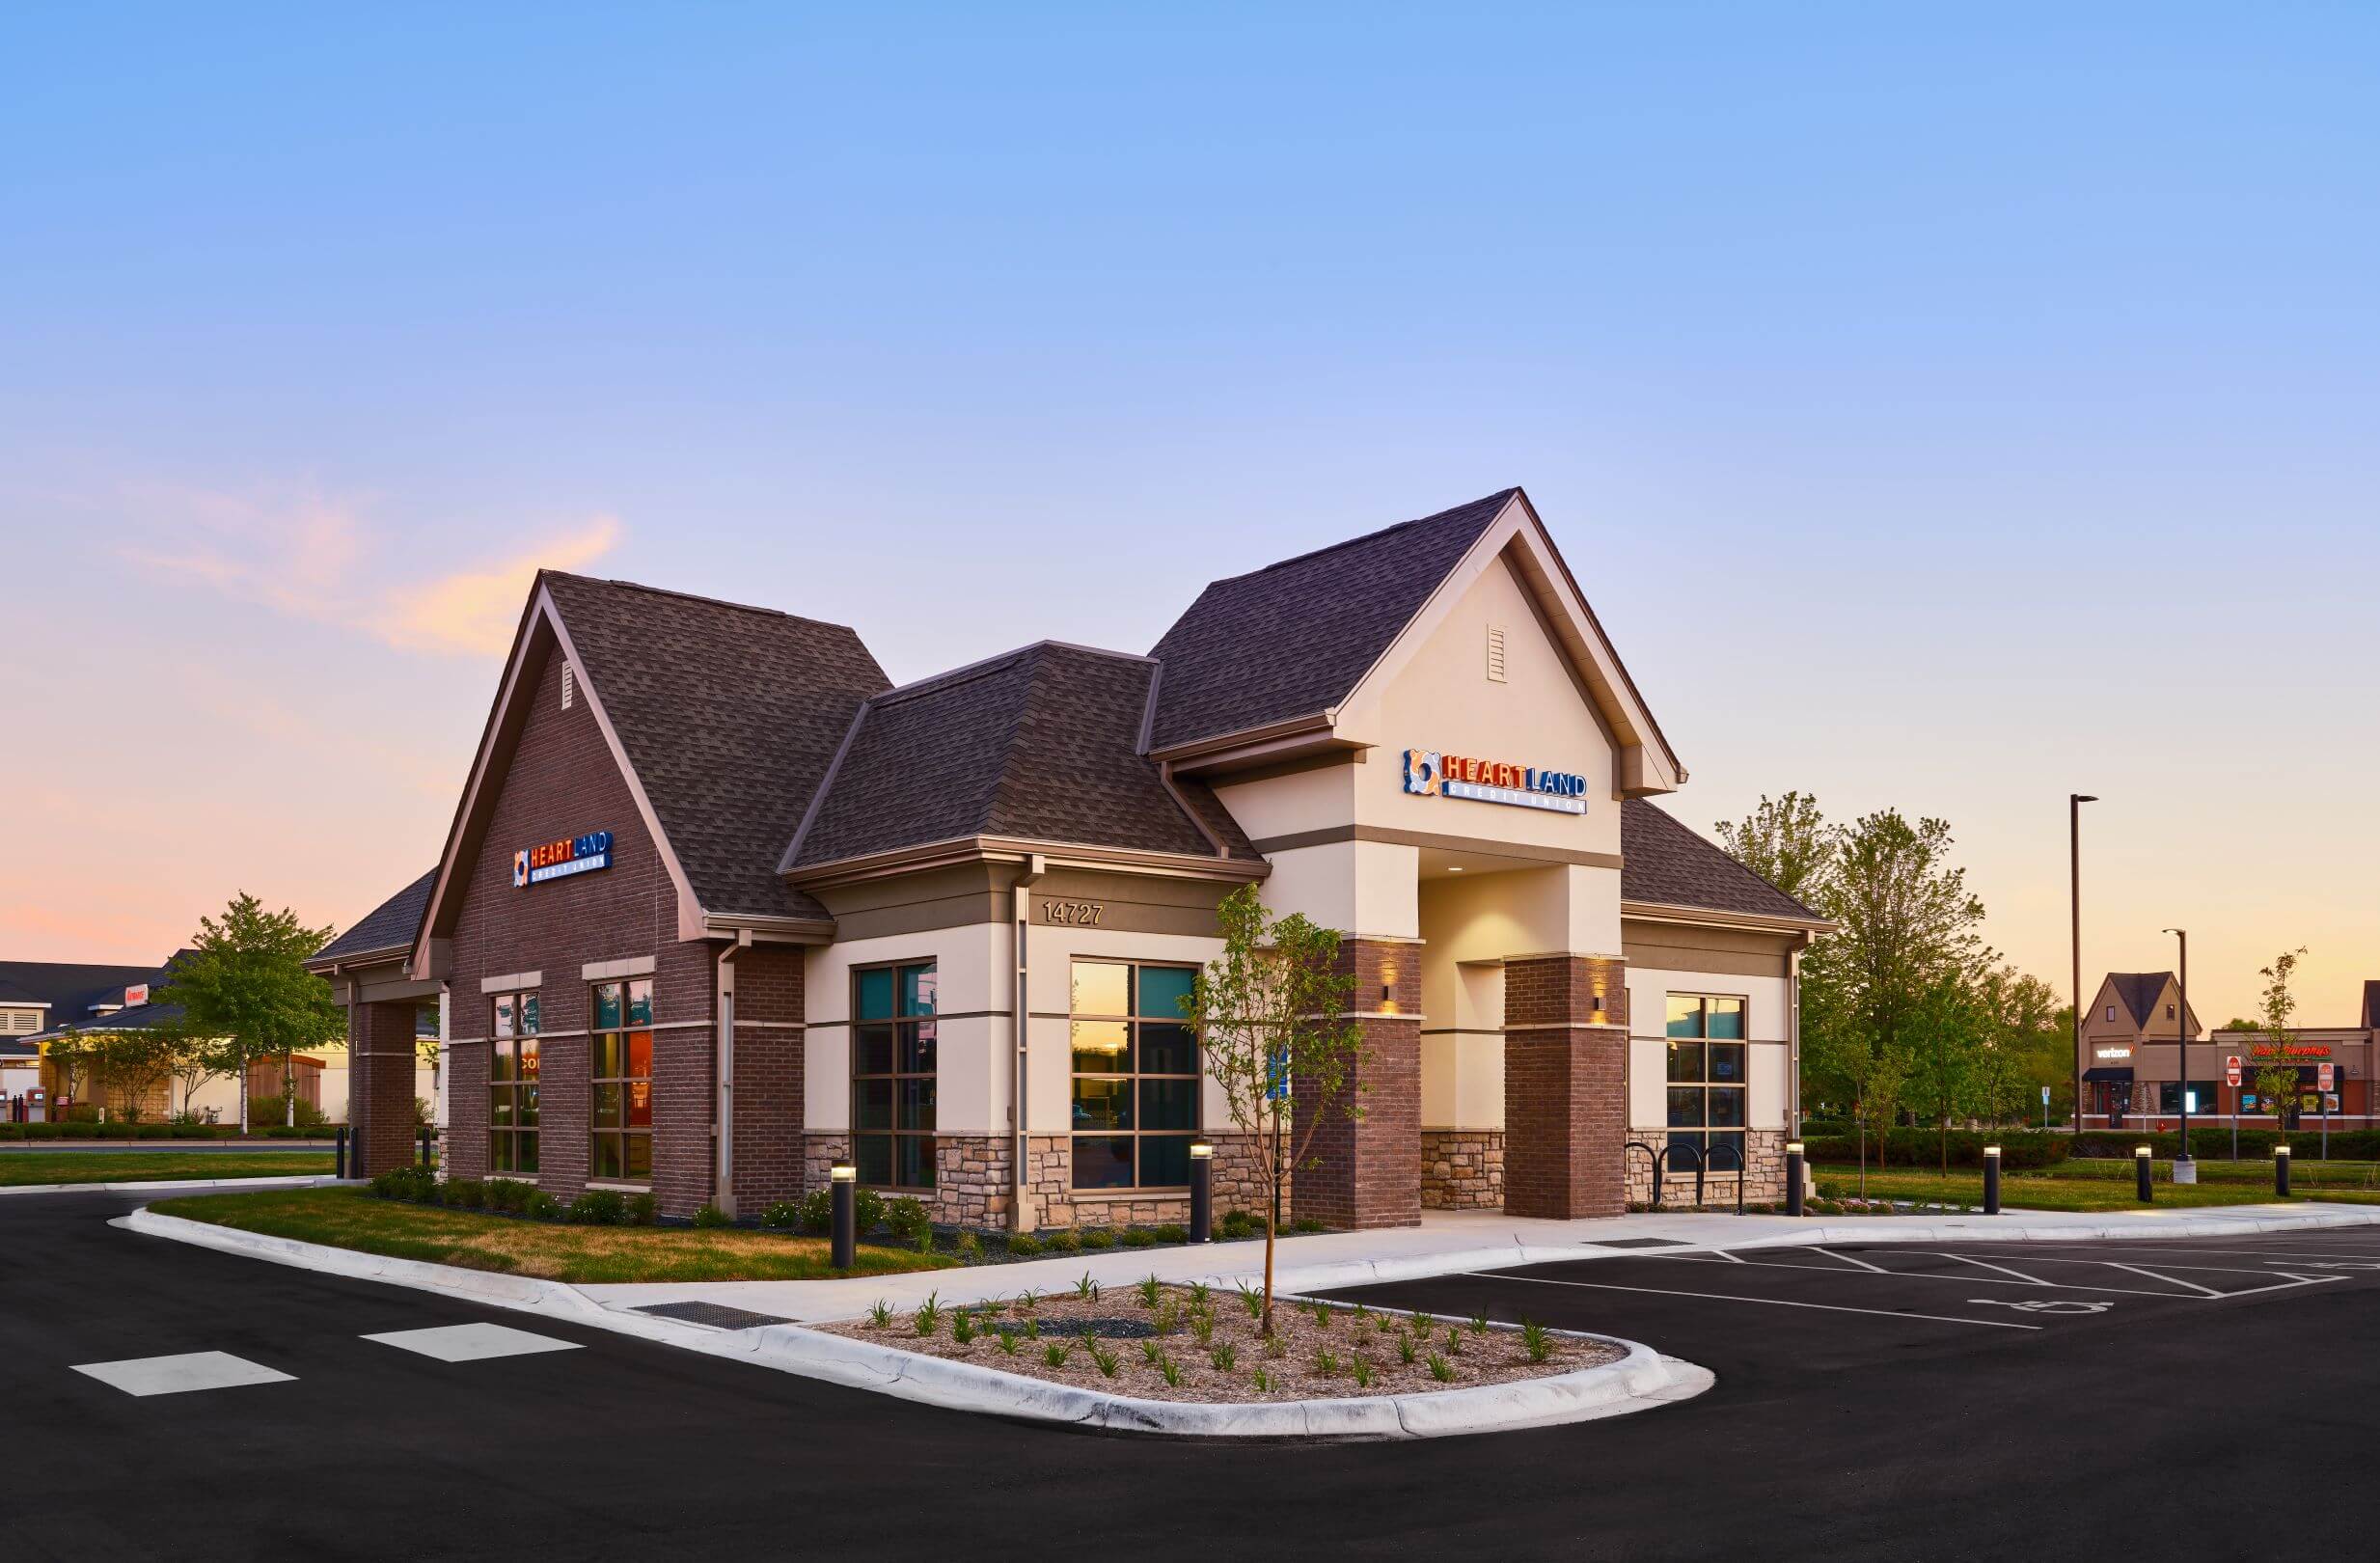 Exterior of the new Heartland Credit Union branch in Hugo Minnesota